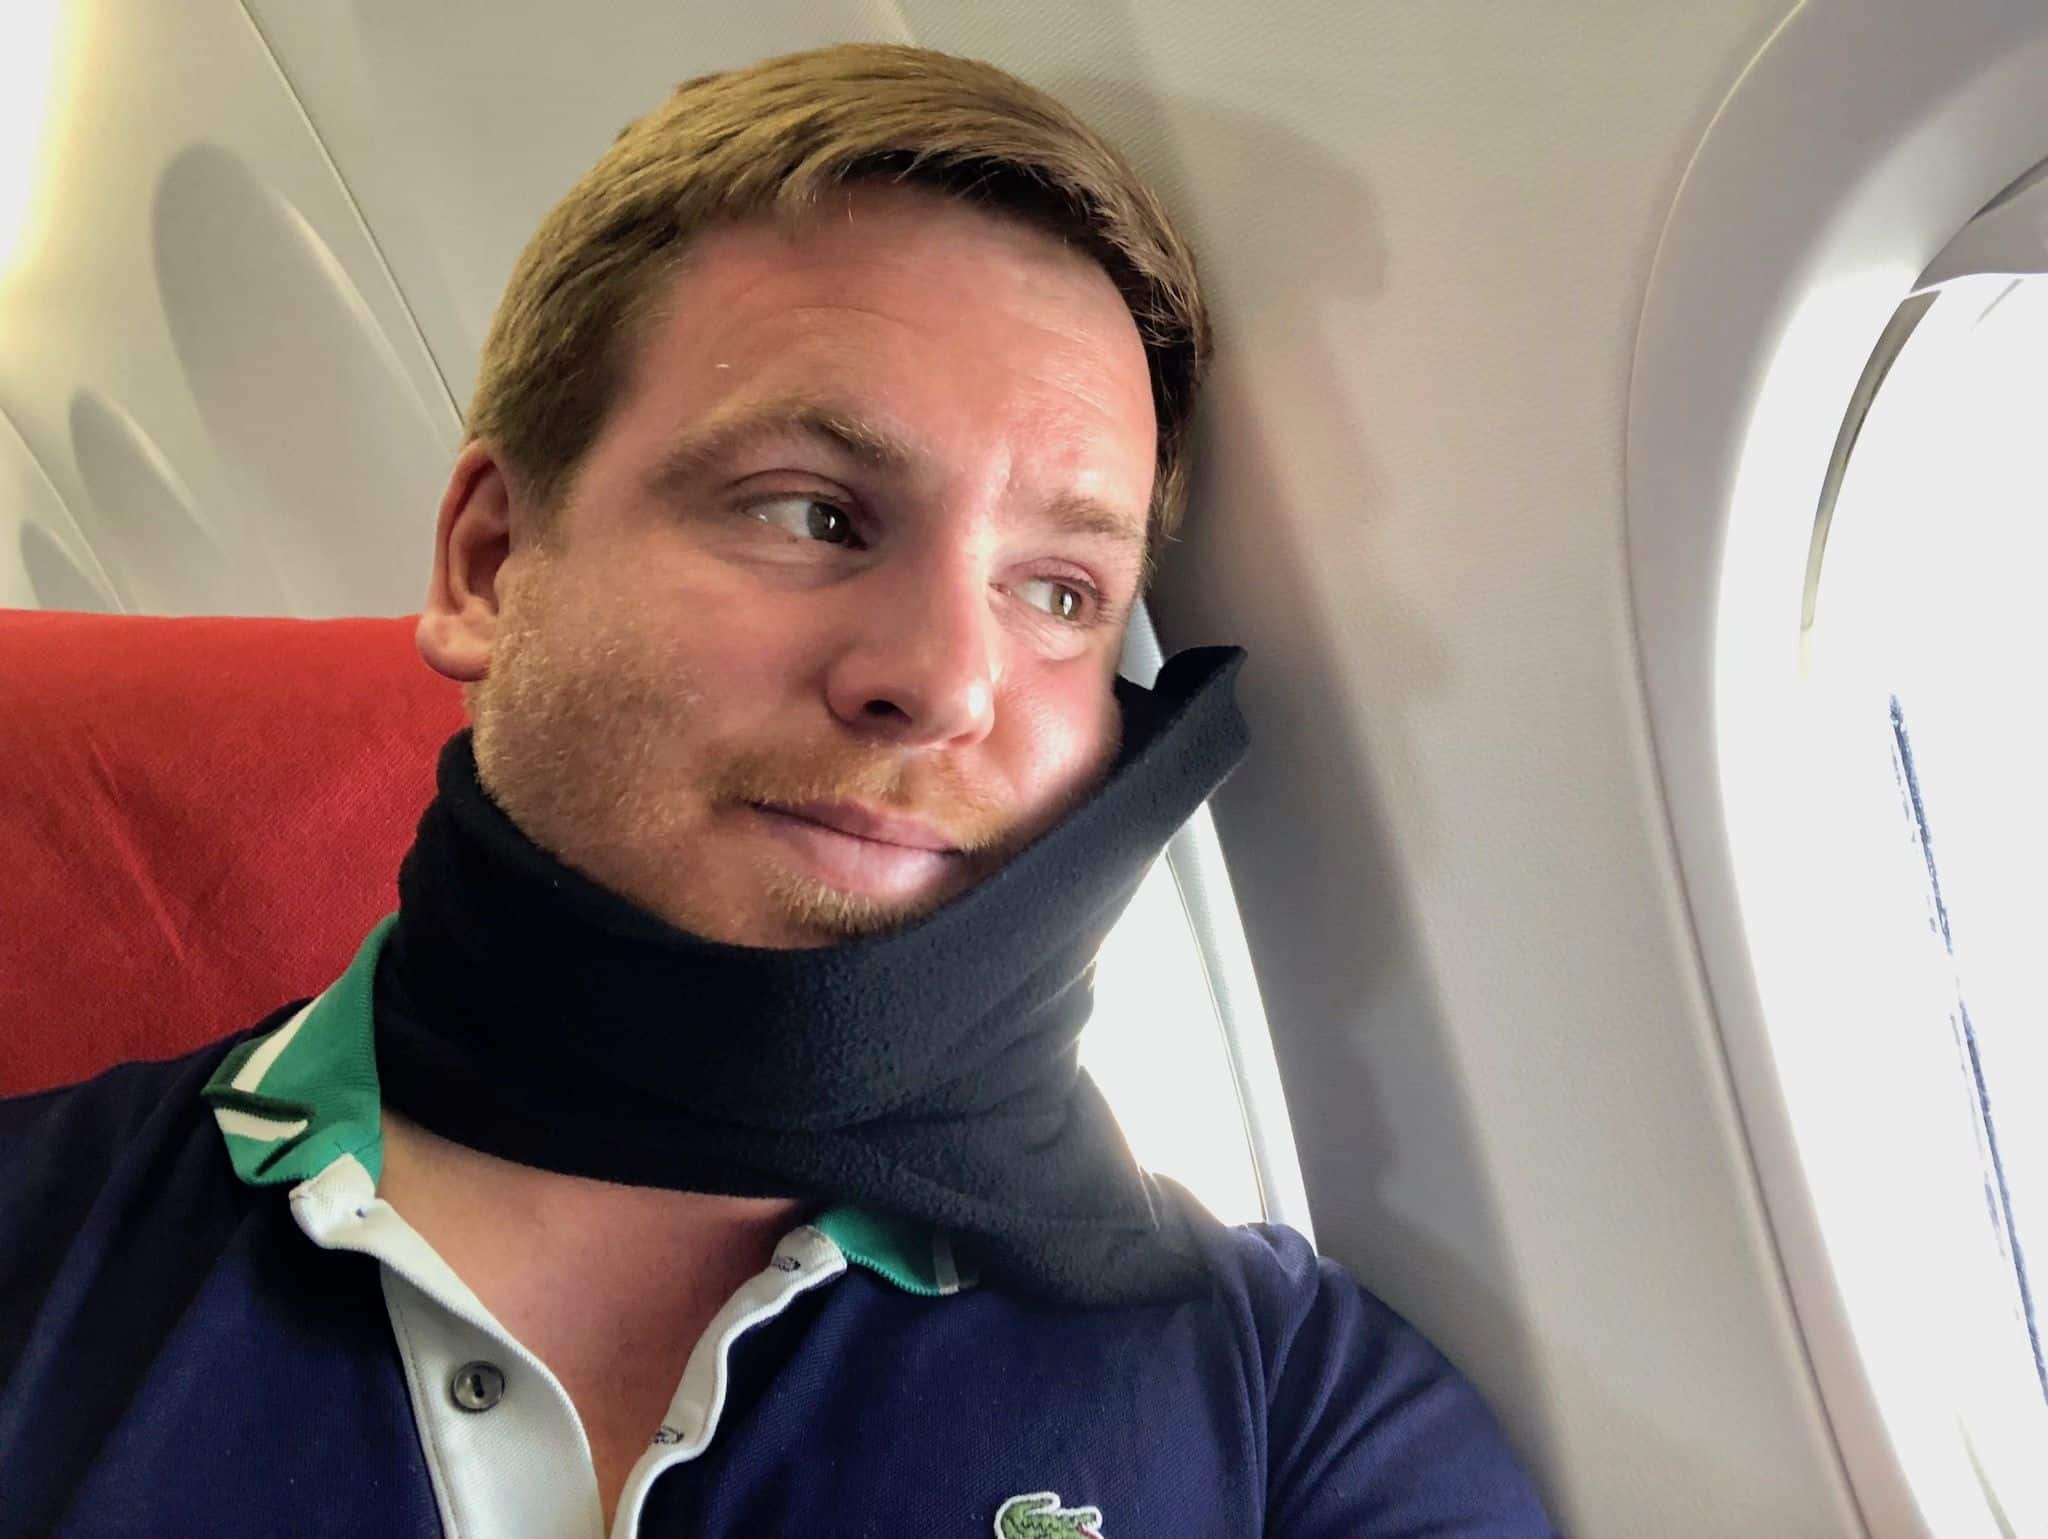 Neck pillow test while traveling - how does the trtl pillow fare?